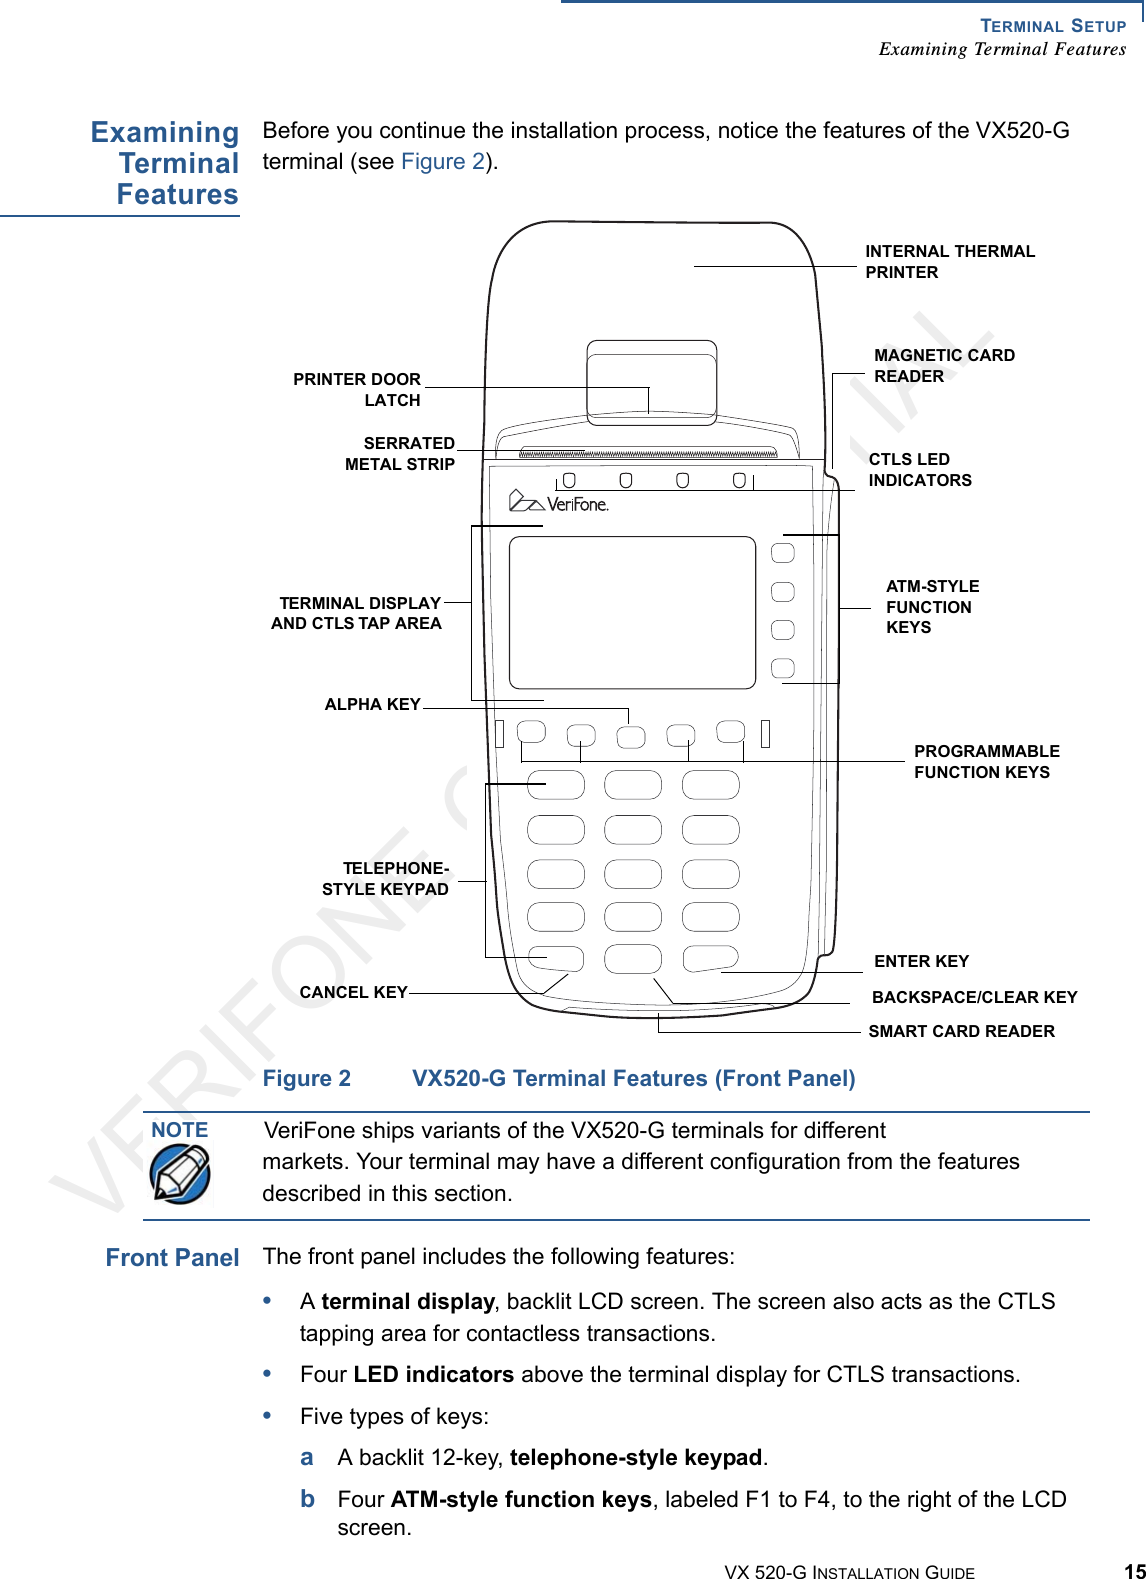 VERIFONE CONFIDENTIAL DRAFTTERMINAL SETUPExamining Terminal FeaturesVX 520-G INSTALLATION GUIDE 15ExaminingTerminalFeaturesBefore you continue the installation process, notice the features of the VX520-G terminal (see Figure 2).Figure 2 VX520-G Terminal Features (Front Panel)Front PanelThe front panel includes the following features:•A terminal display, backlit LCD screen. The screen also acts as the CTLS tapping area for contactless transactions.•Four LED indicators above the terminal display for CTLS transactions.•Five types of keys:aA backlit 12-key, telephone-style keypad.bFour ATM-style function keys, labeled F1 to F4, to the right of the LCD screen.INTERNAL THERMAL PRINTERMAGNETIC CARD READER ATM-STYLE FUNCTION KEYSPROGRAMMABLE FUNCTION KEYSENTER KEYBACKSPACE/CLEAR KEYSMART CARD READERCANCEL KEYTELEPHONE-STYLE KEYPADALPHA KEYTERMINAL DISPLAYAND CTLS TAP AREASERRATEDMETAL STRIPPRINTER DOORLATCHCTLS LED INDICATORSNOTE VeriFone ships variants of the VX520-G terminals for different markets. Your terminal may have a different configuration from the features described in this section.